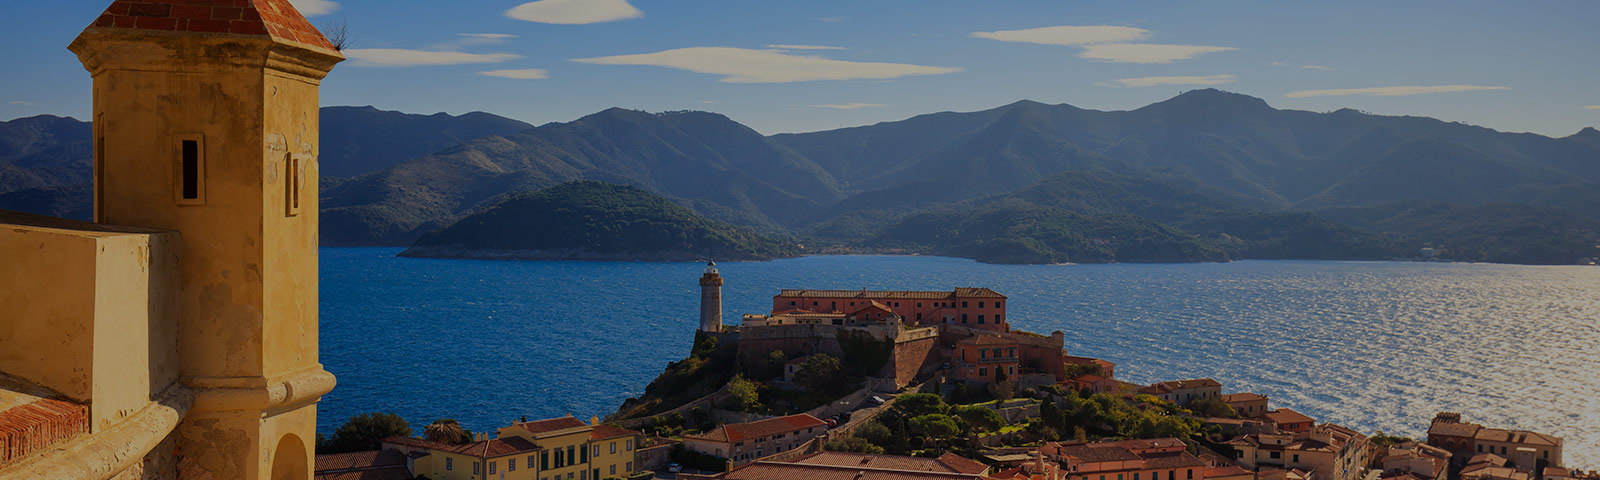 mediterranean landscape on the water with hills in the background